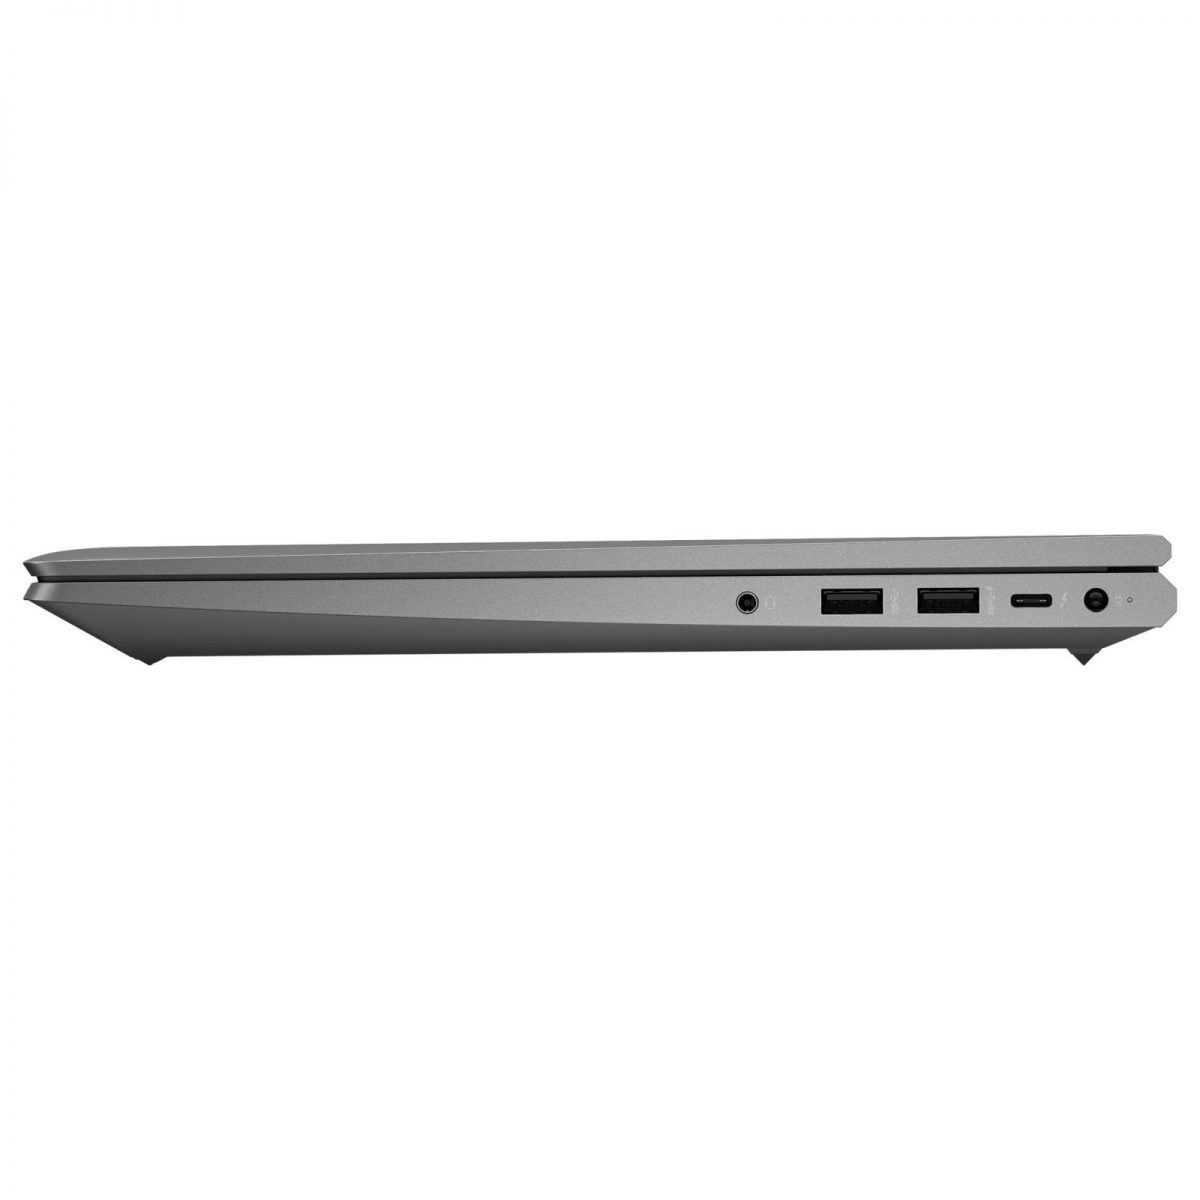 ZBook Power G7 Mobile Workstation